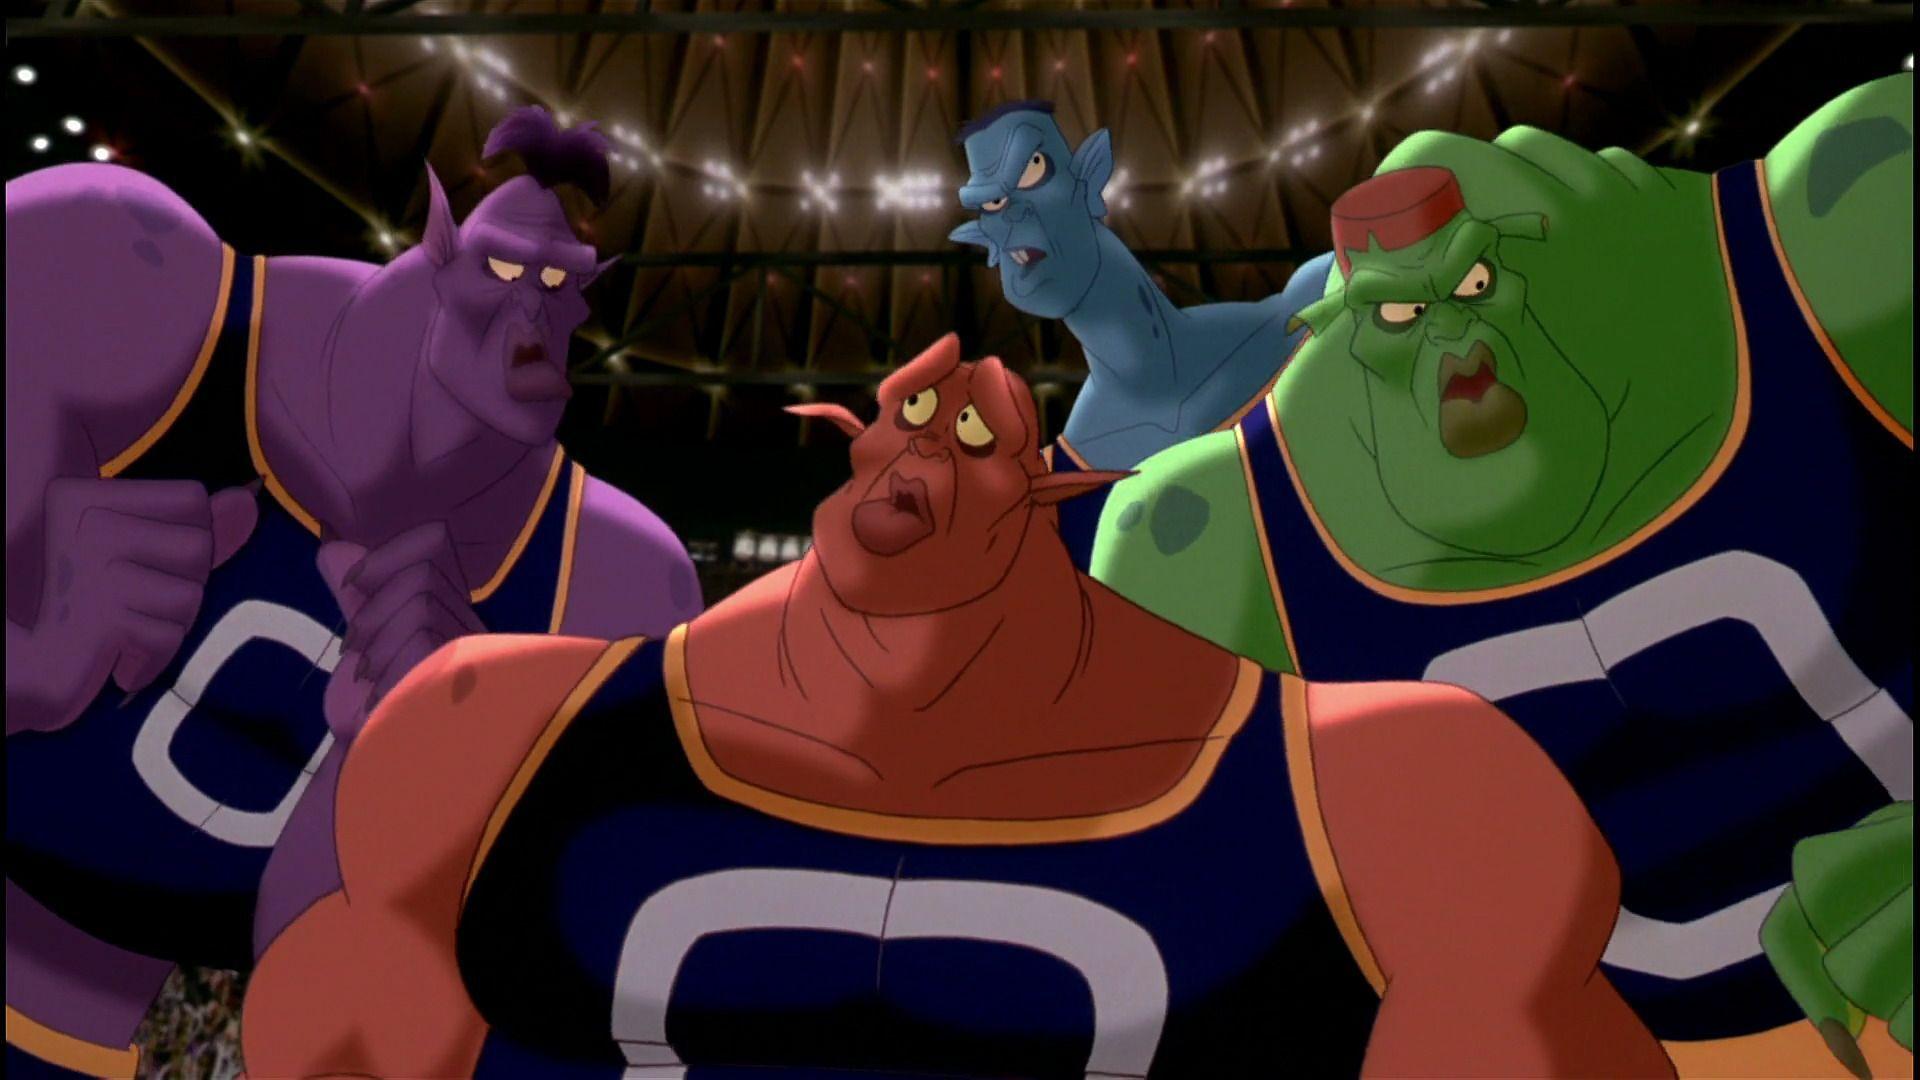 Space Jam HD Wallpapers - Top Free Space Jam HD Backgrounds